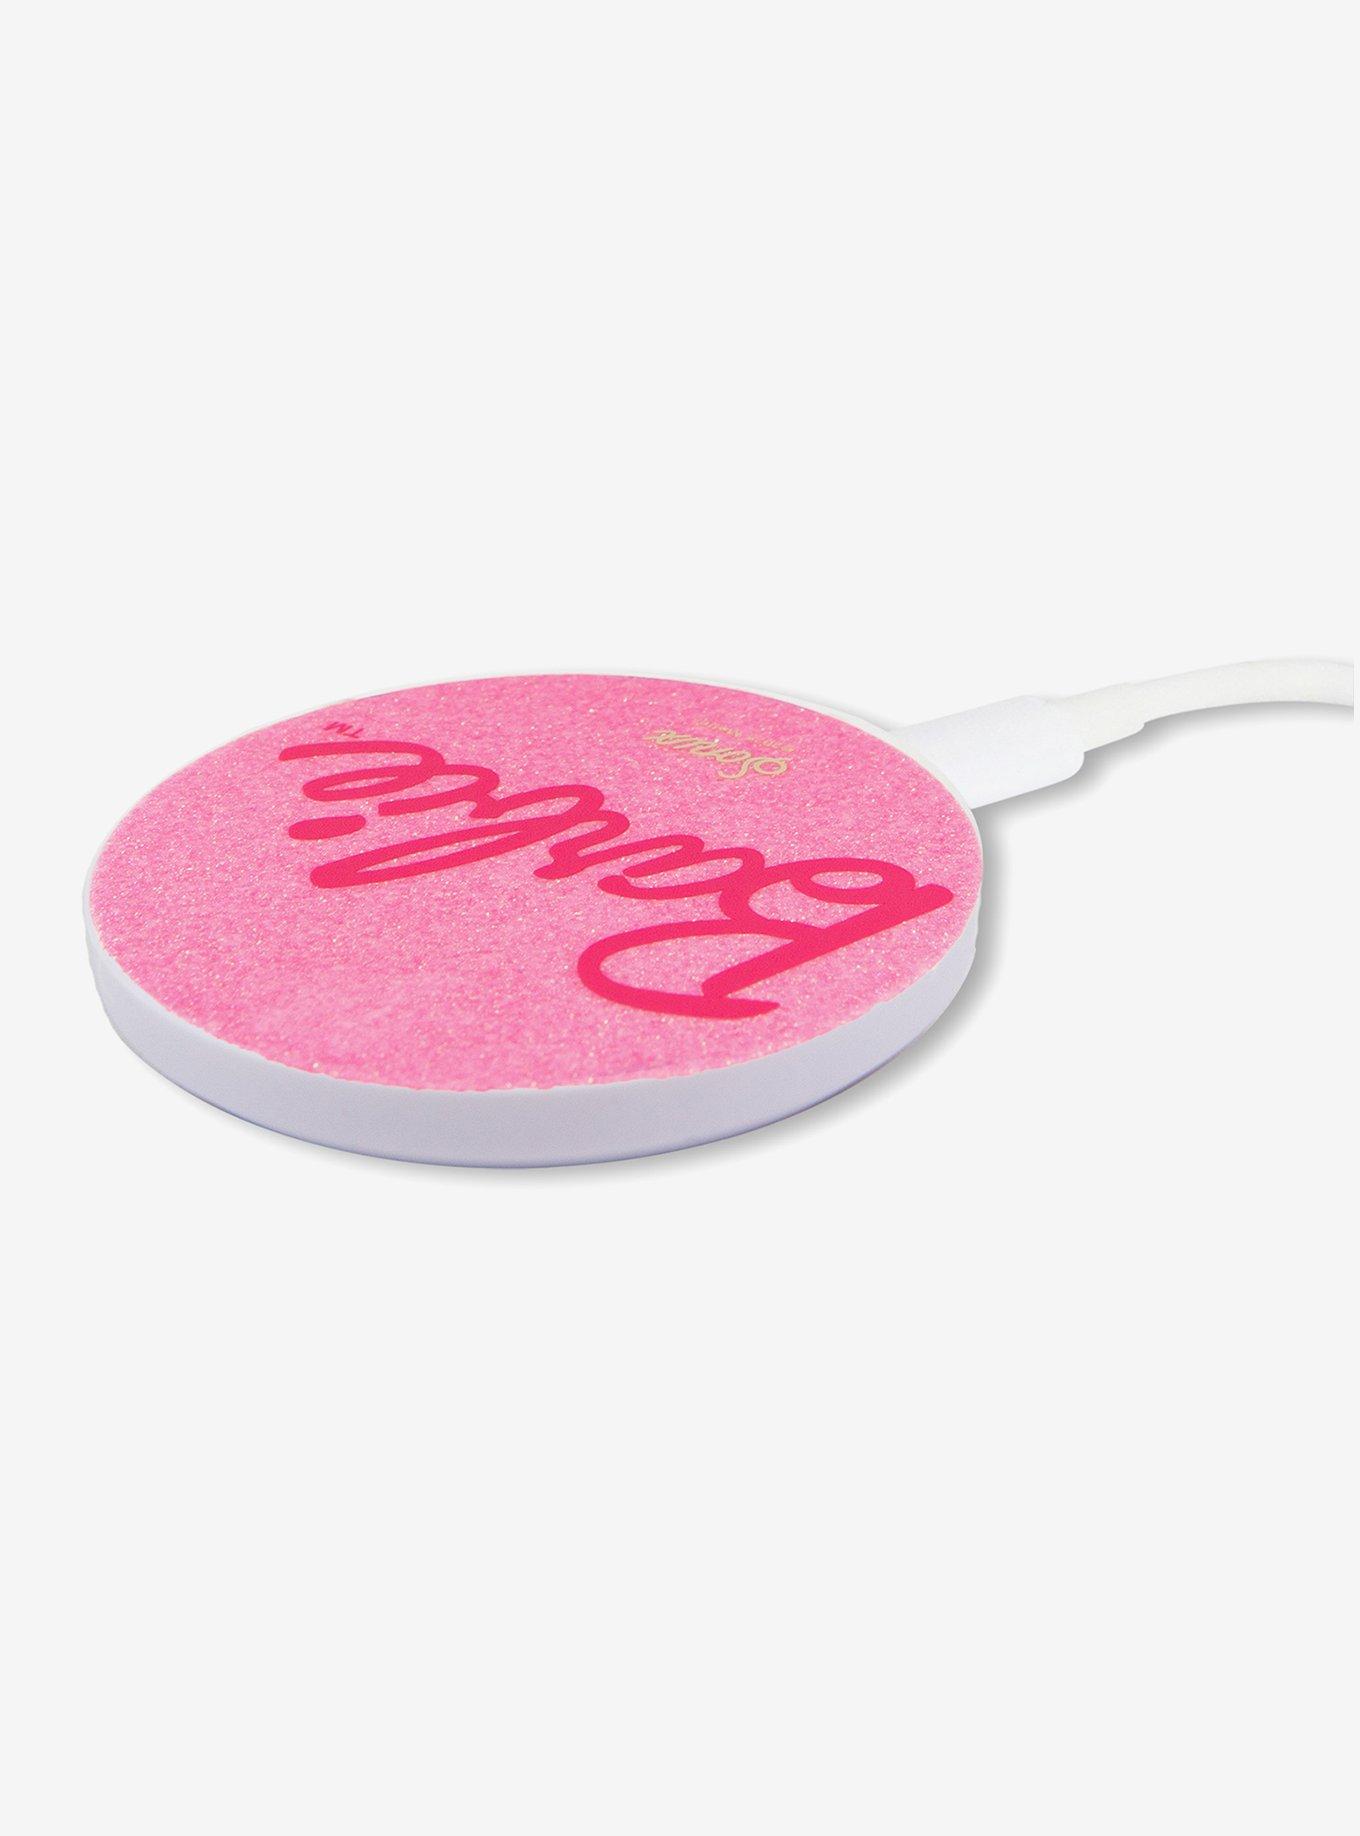 Sonix x Barbie Perfectly Pink Magnetic Link Wireless Charger, , alternate